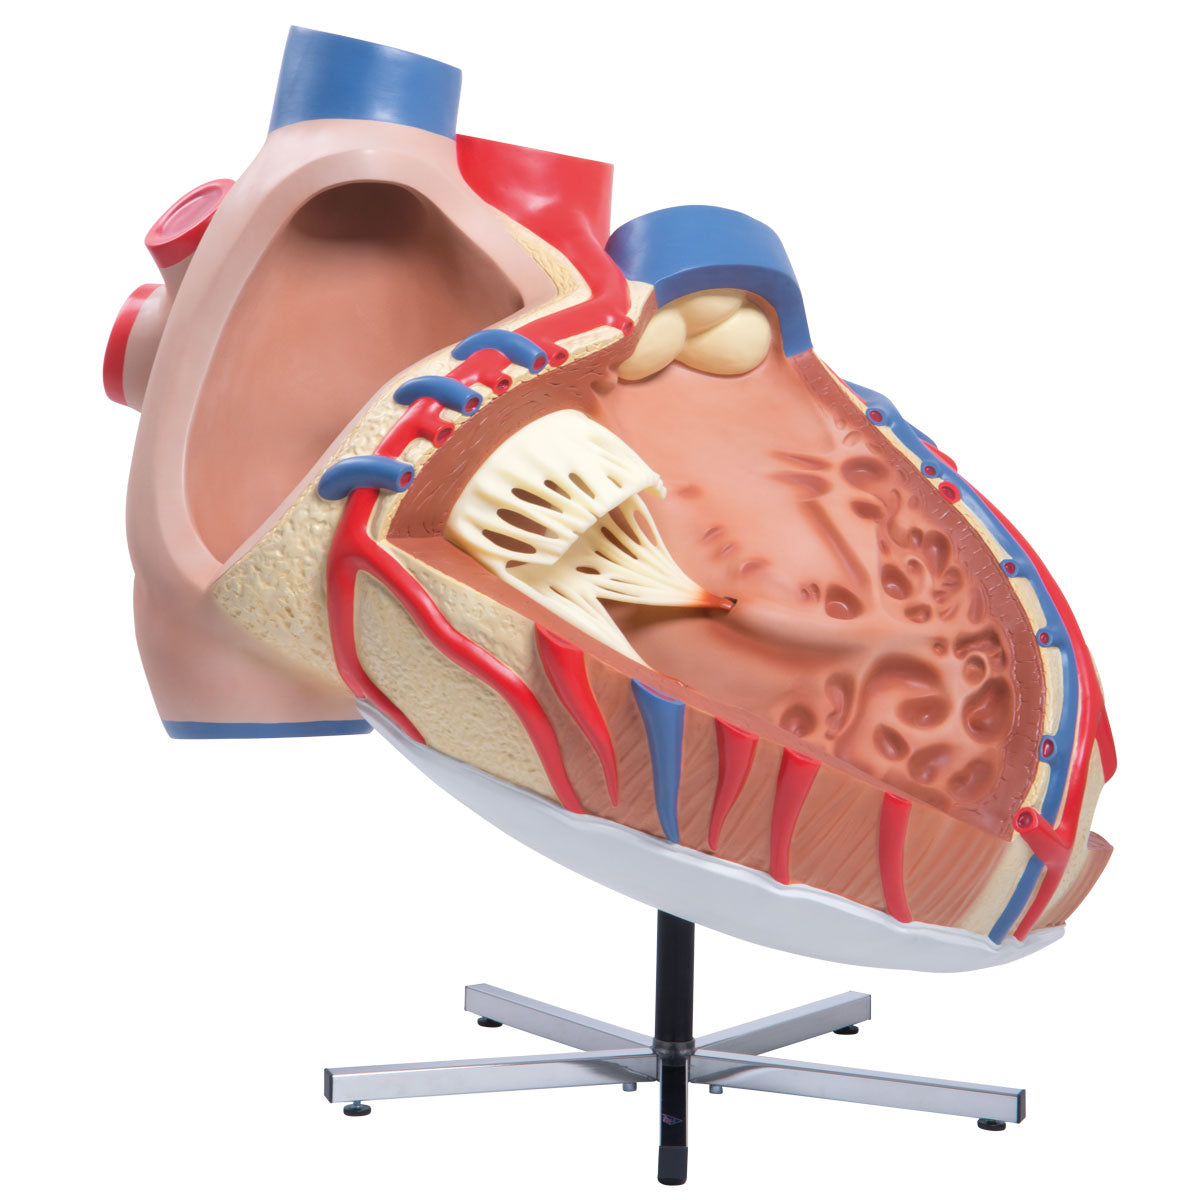 VD250 Giant Heart, 8 Times Life Size